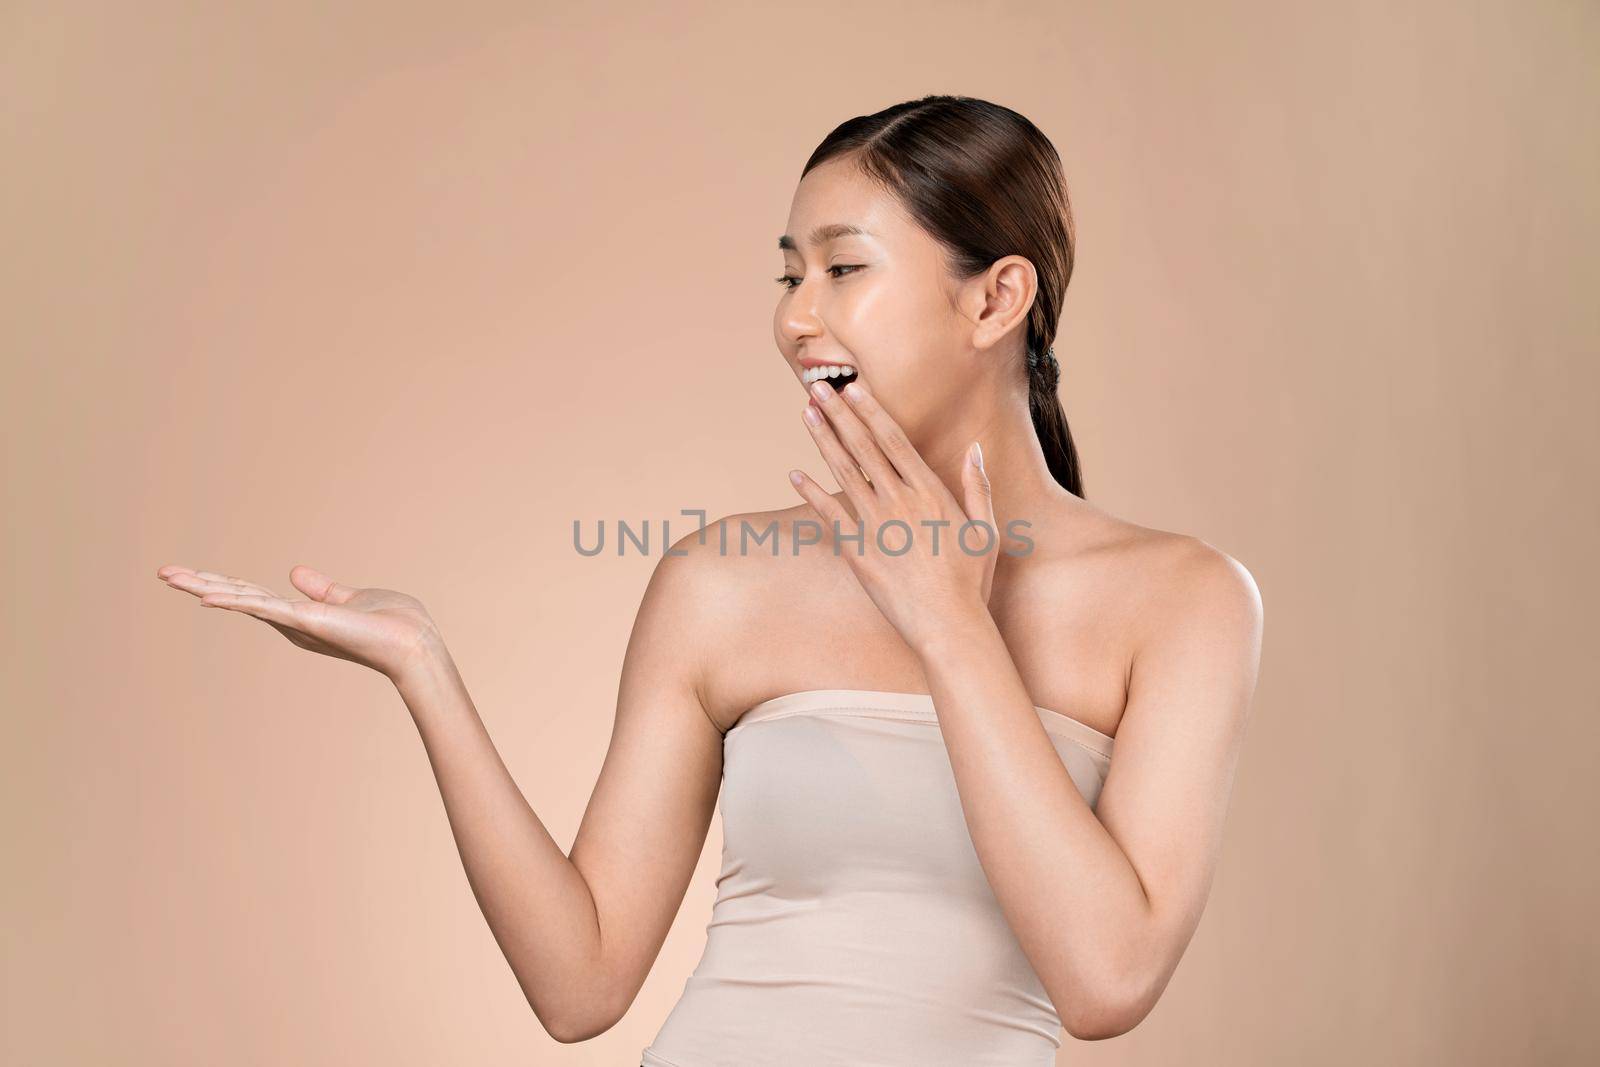 Portrait of ardent woman looking at camera, holding empty space for product, advertising text place, isolated background. Concept of healthcare advertising for skincare, beauty care product.